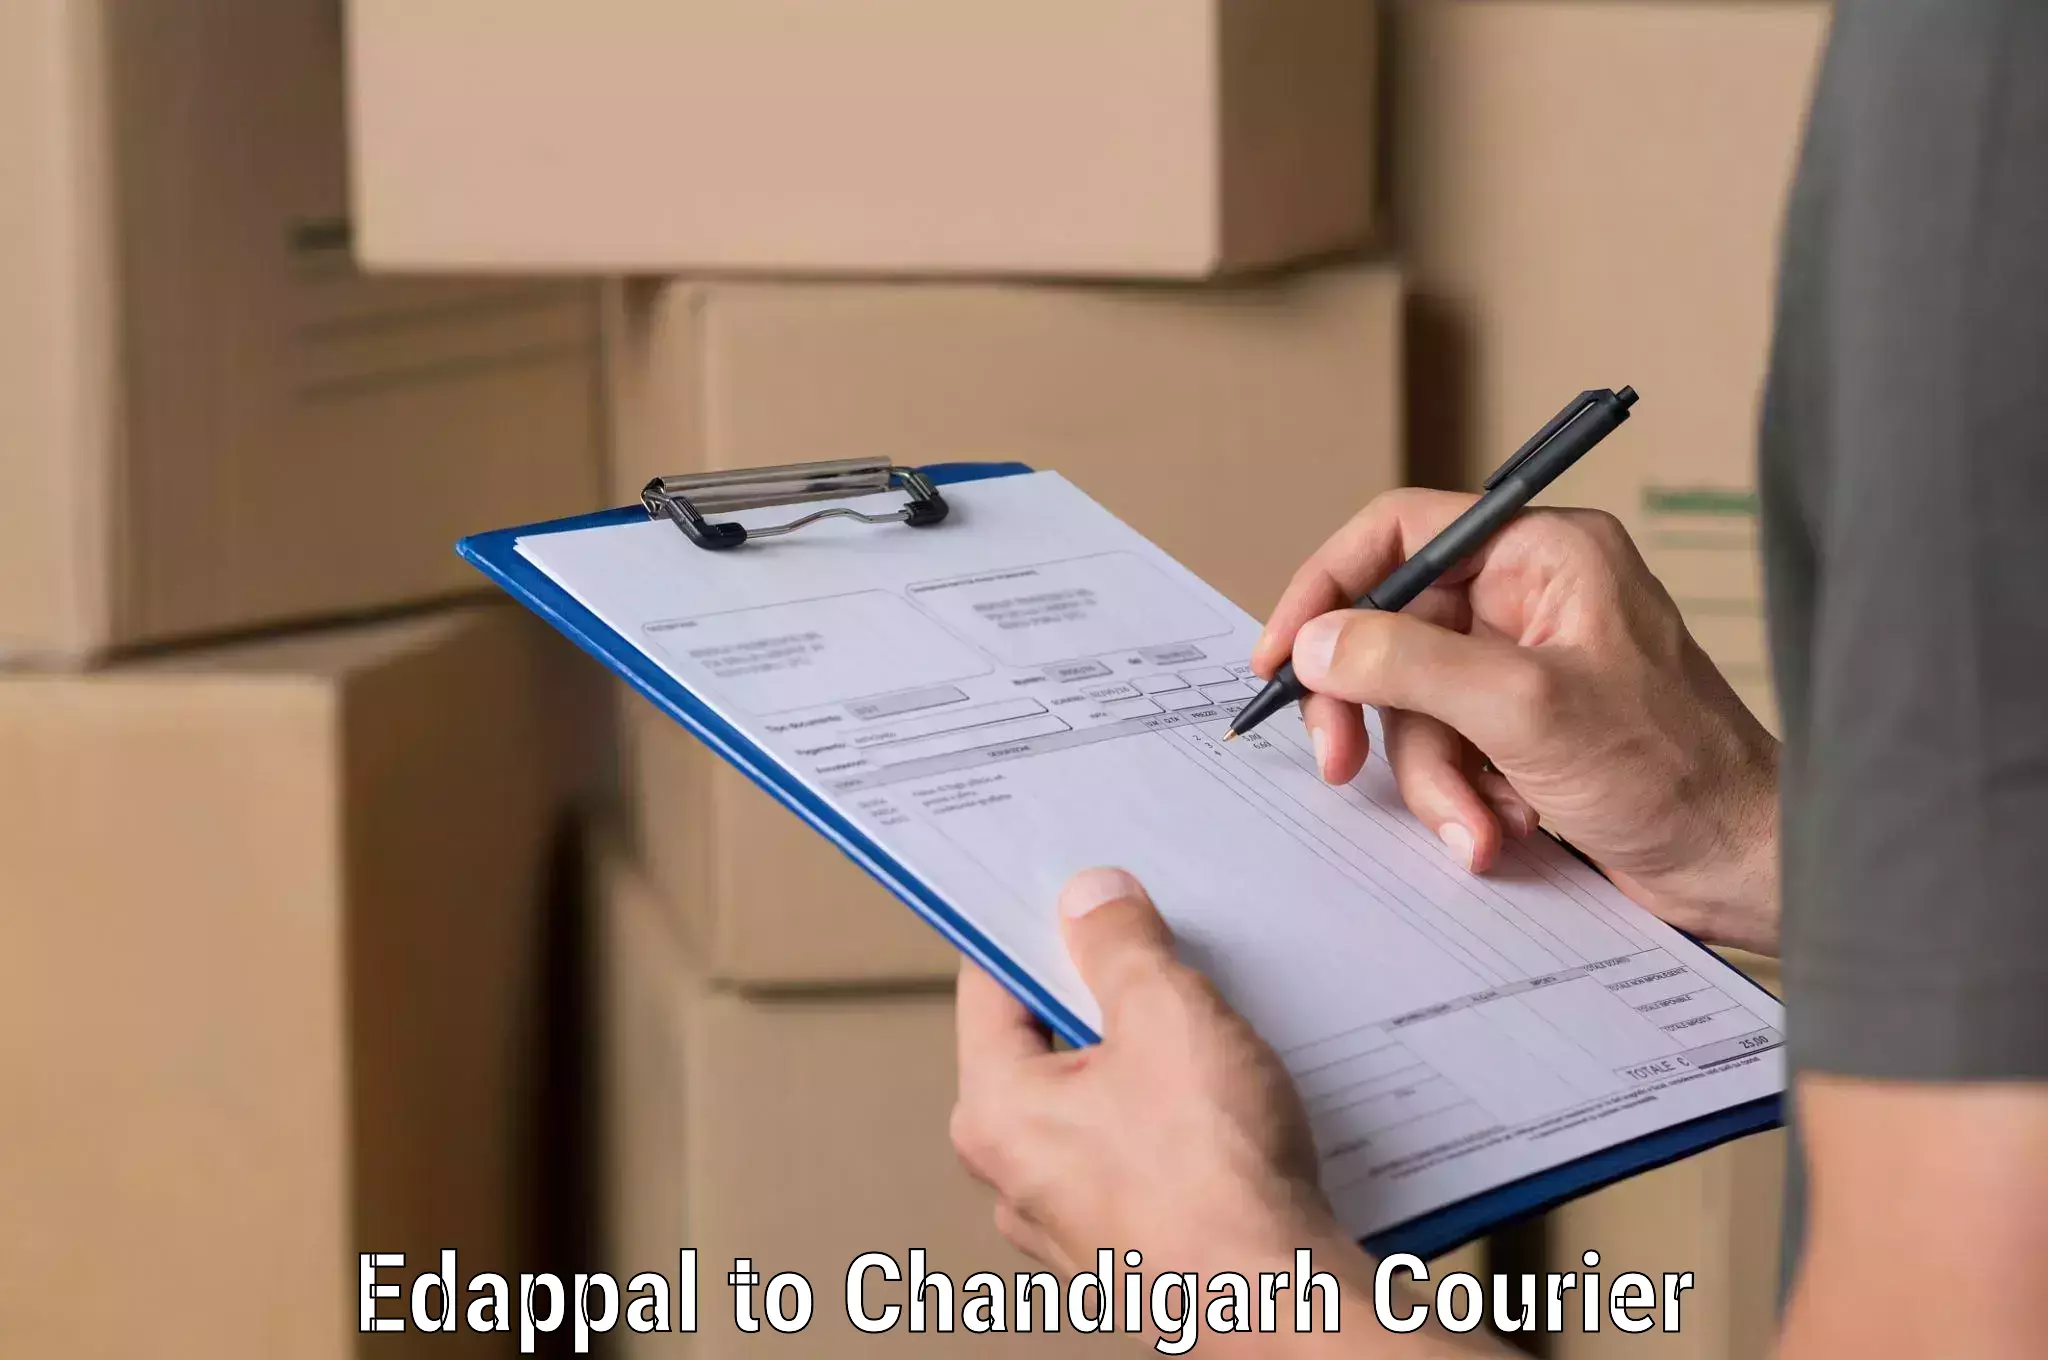 Easy return solutions in Edappal to Chandigarh